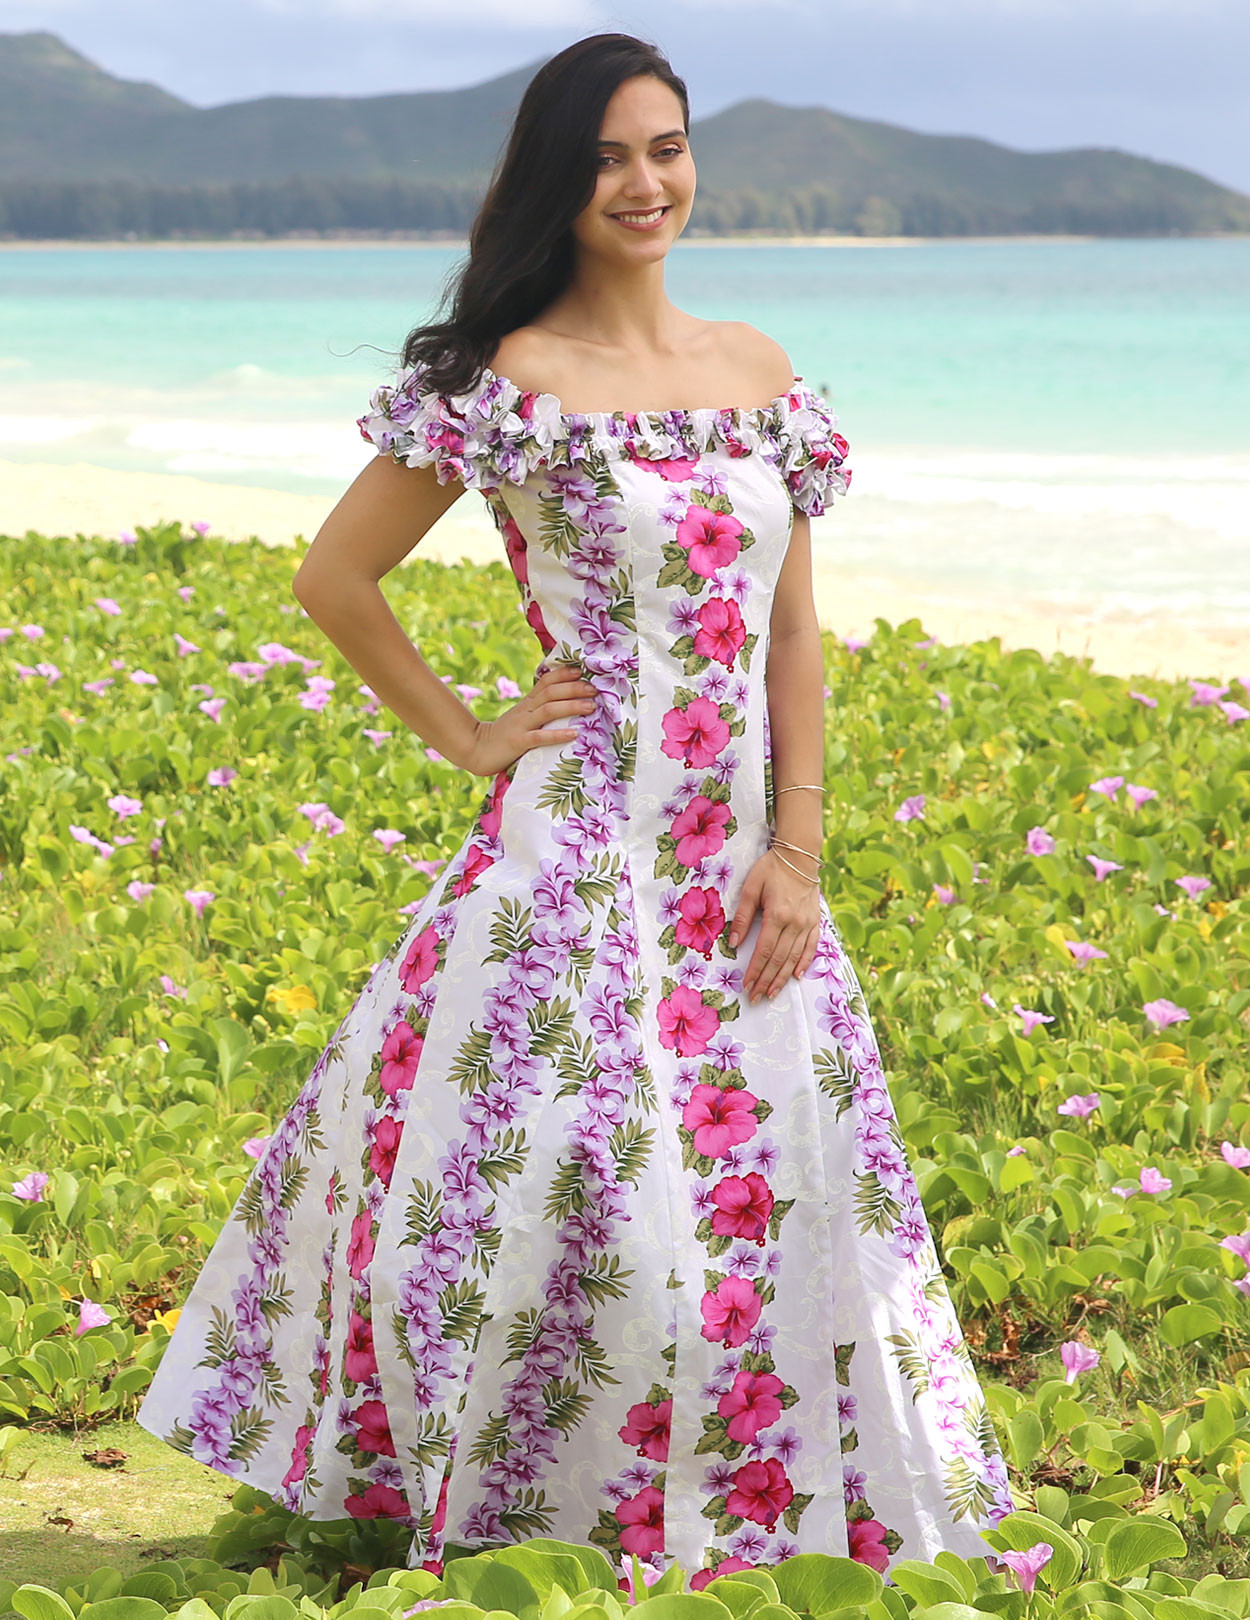 Amazing Island Wedding Dresses  Don t miss out 